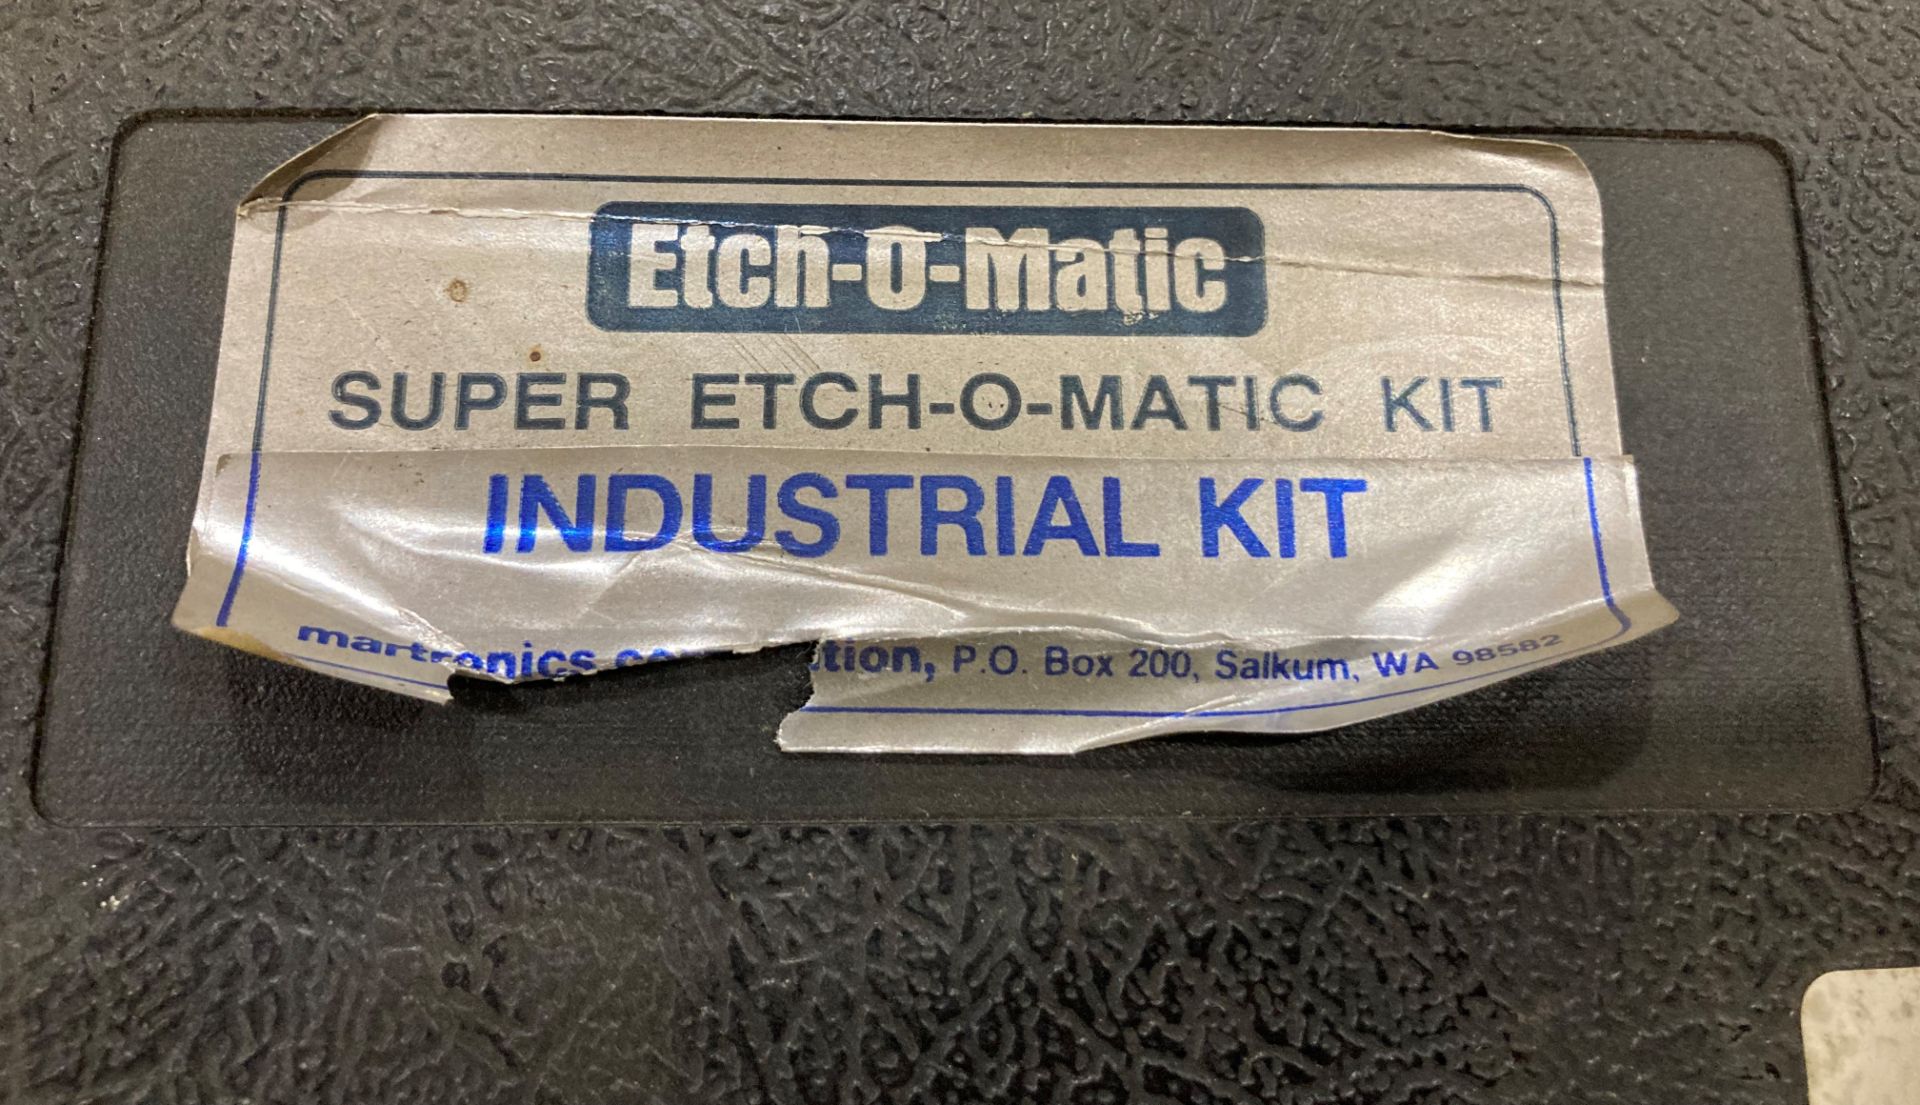 Etch-O-Matic Super Etching Industrial Kit, M/N: JT50 SIK - Image 5 of 6